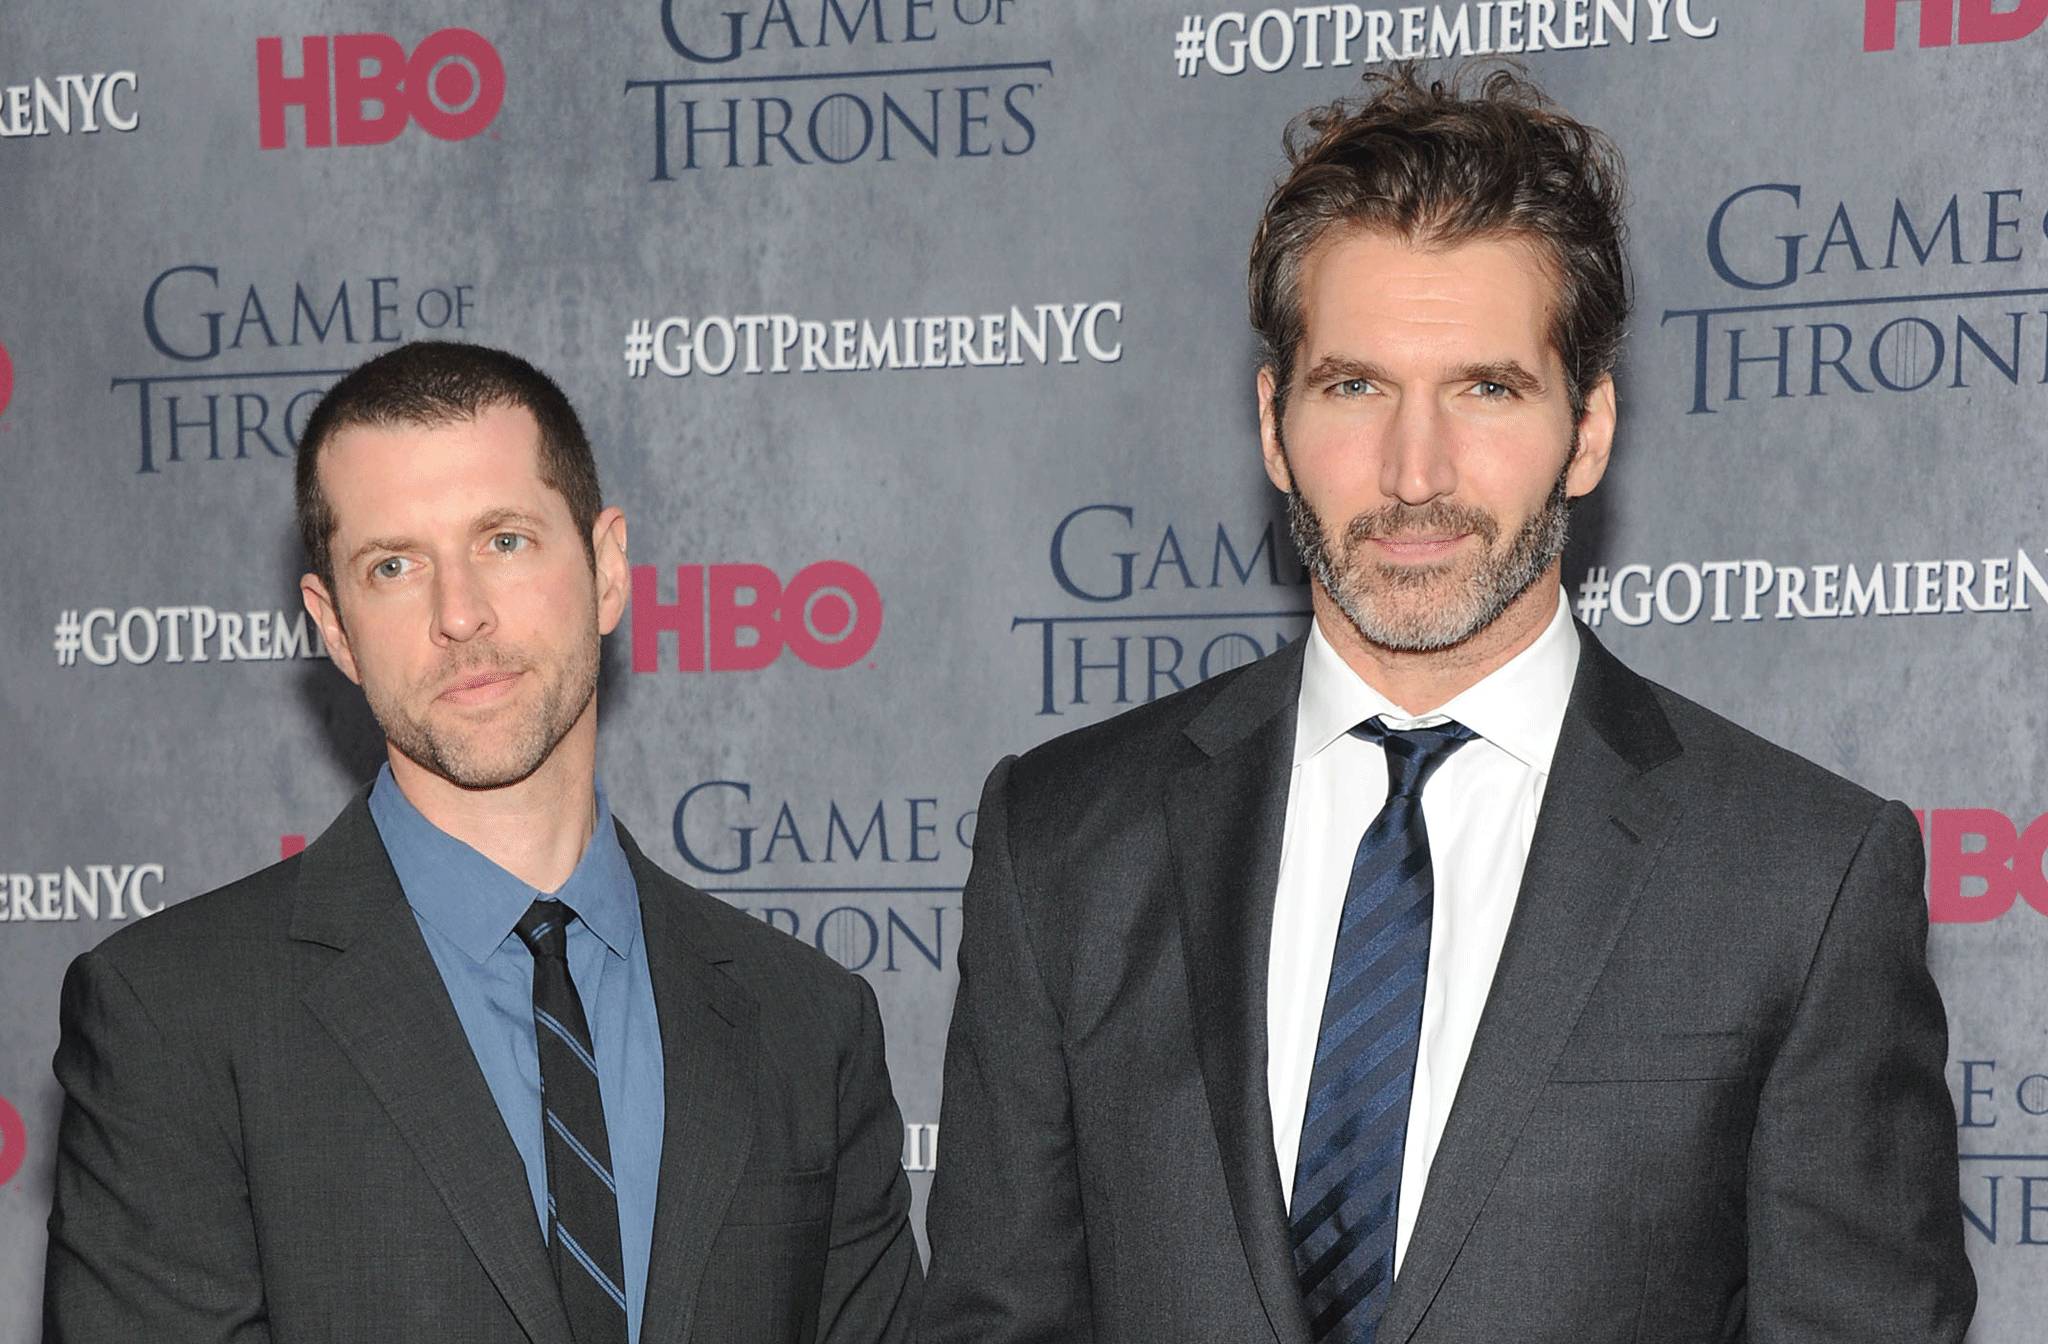 The pair are struggling to fit the film in their hectic Game of Thrones schedule